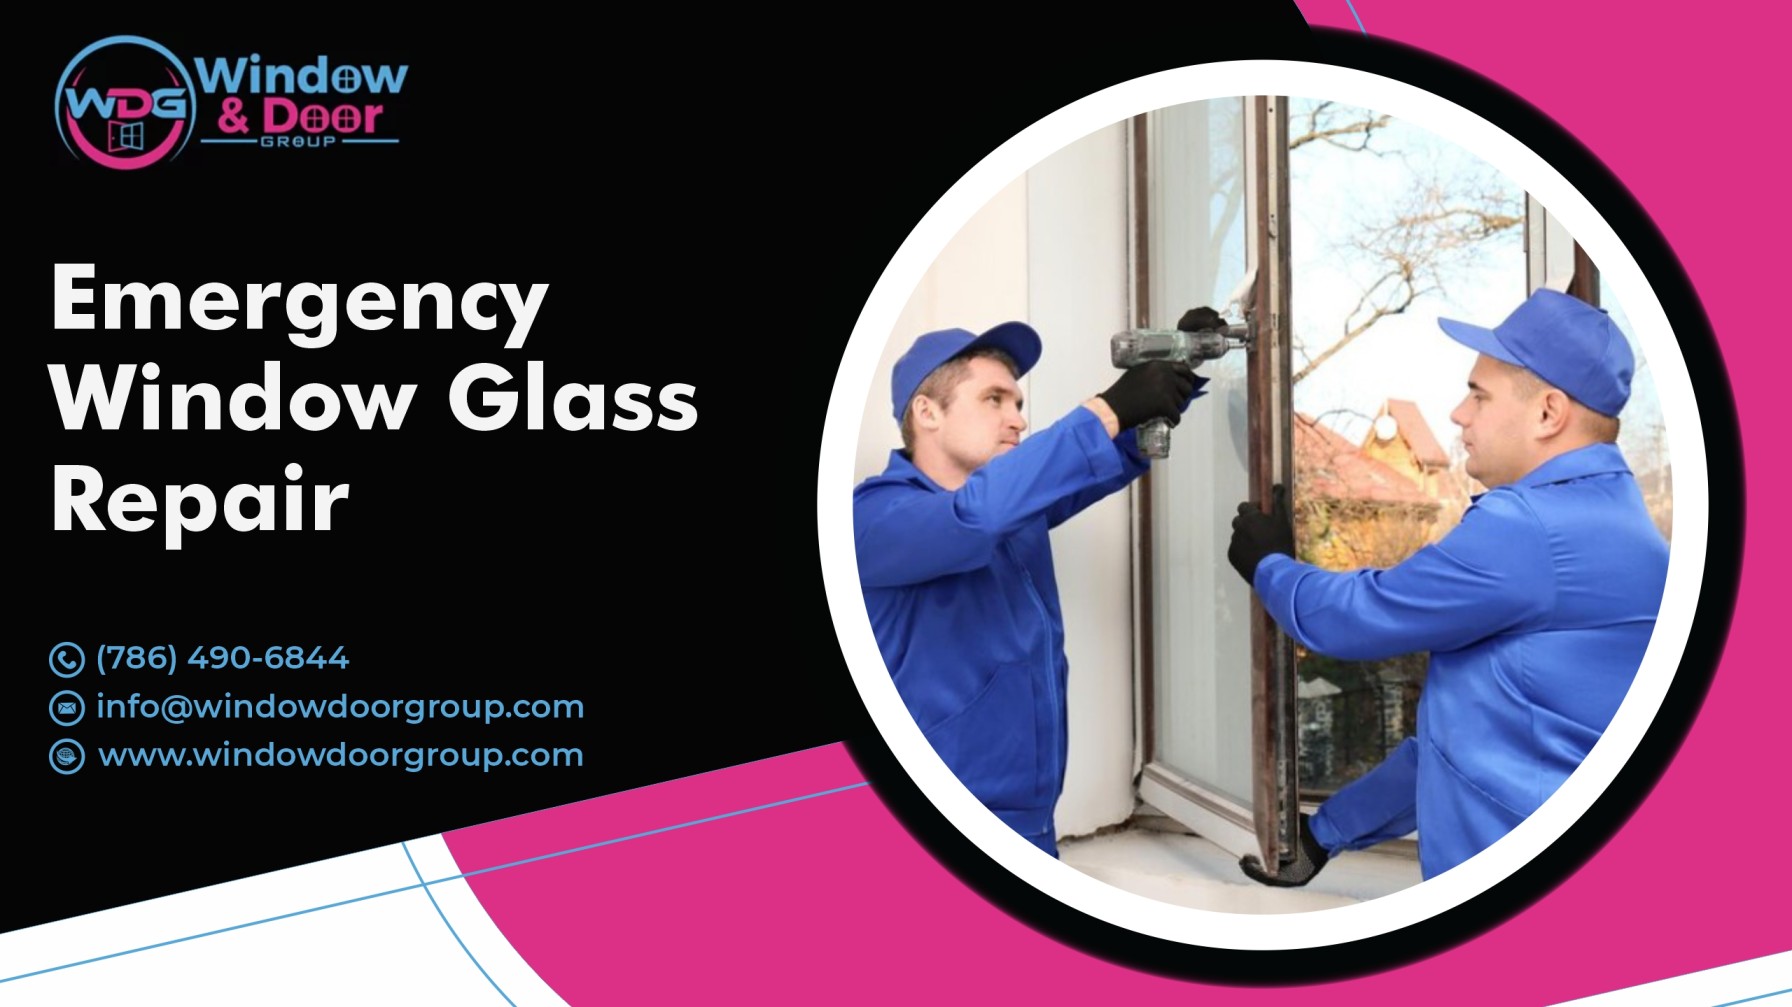 Can Emergency Window Glass Repair Prevent Further Damage?